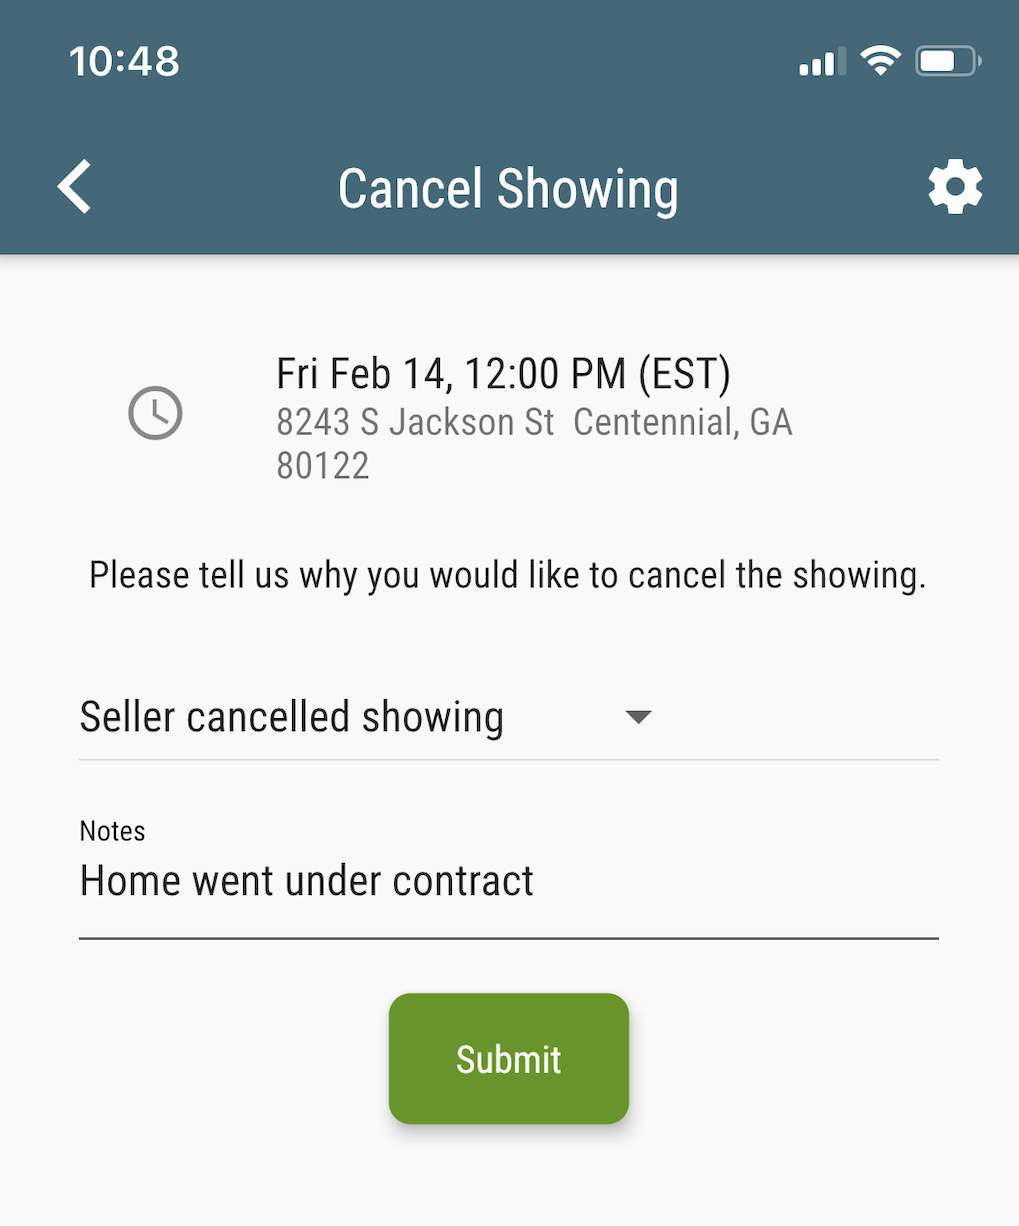 Cancel a showing request in Showami